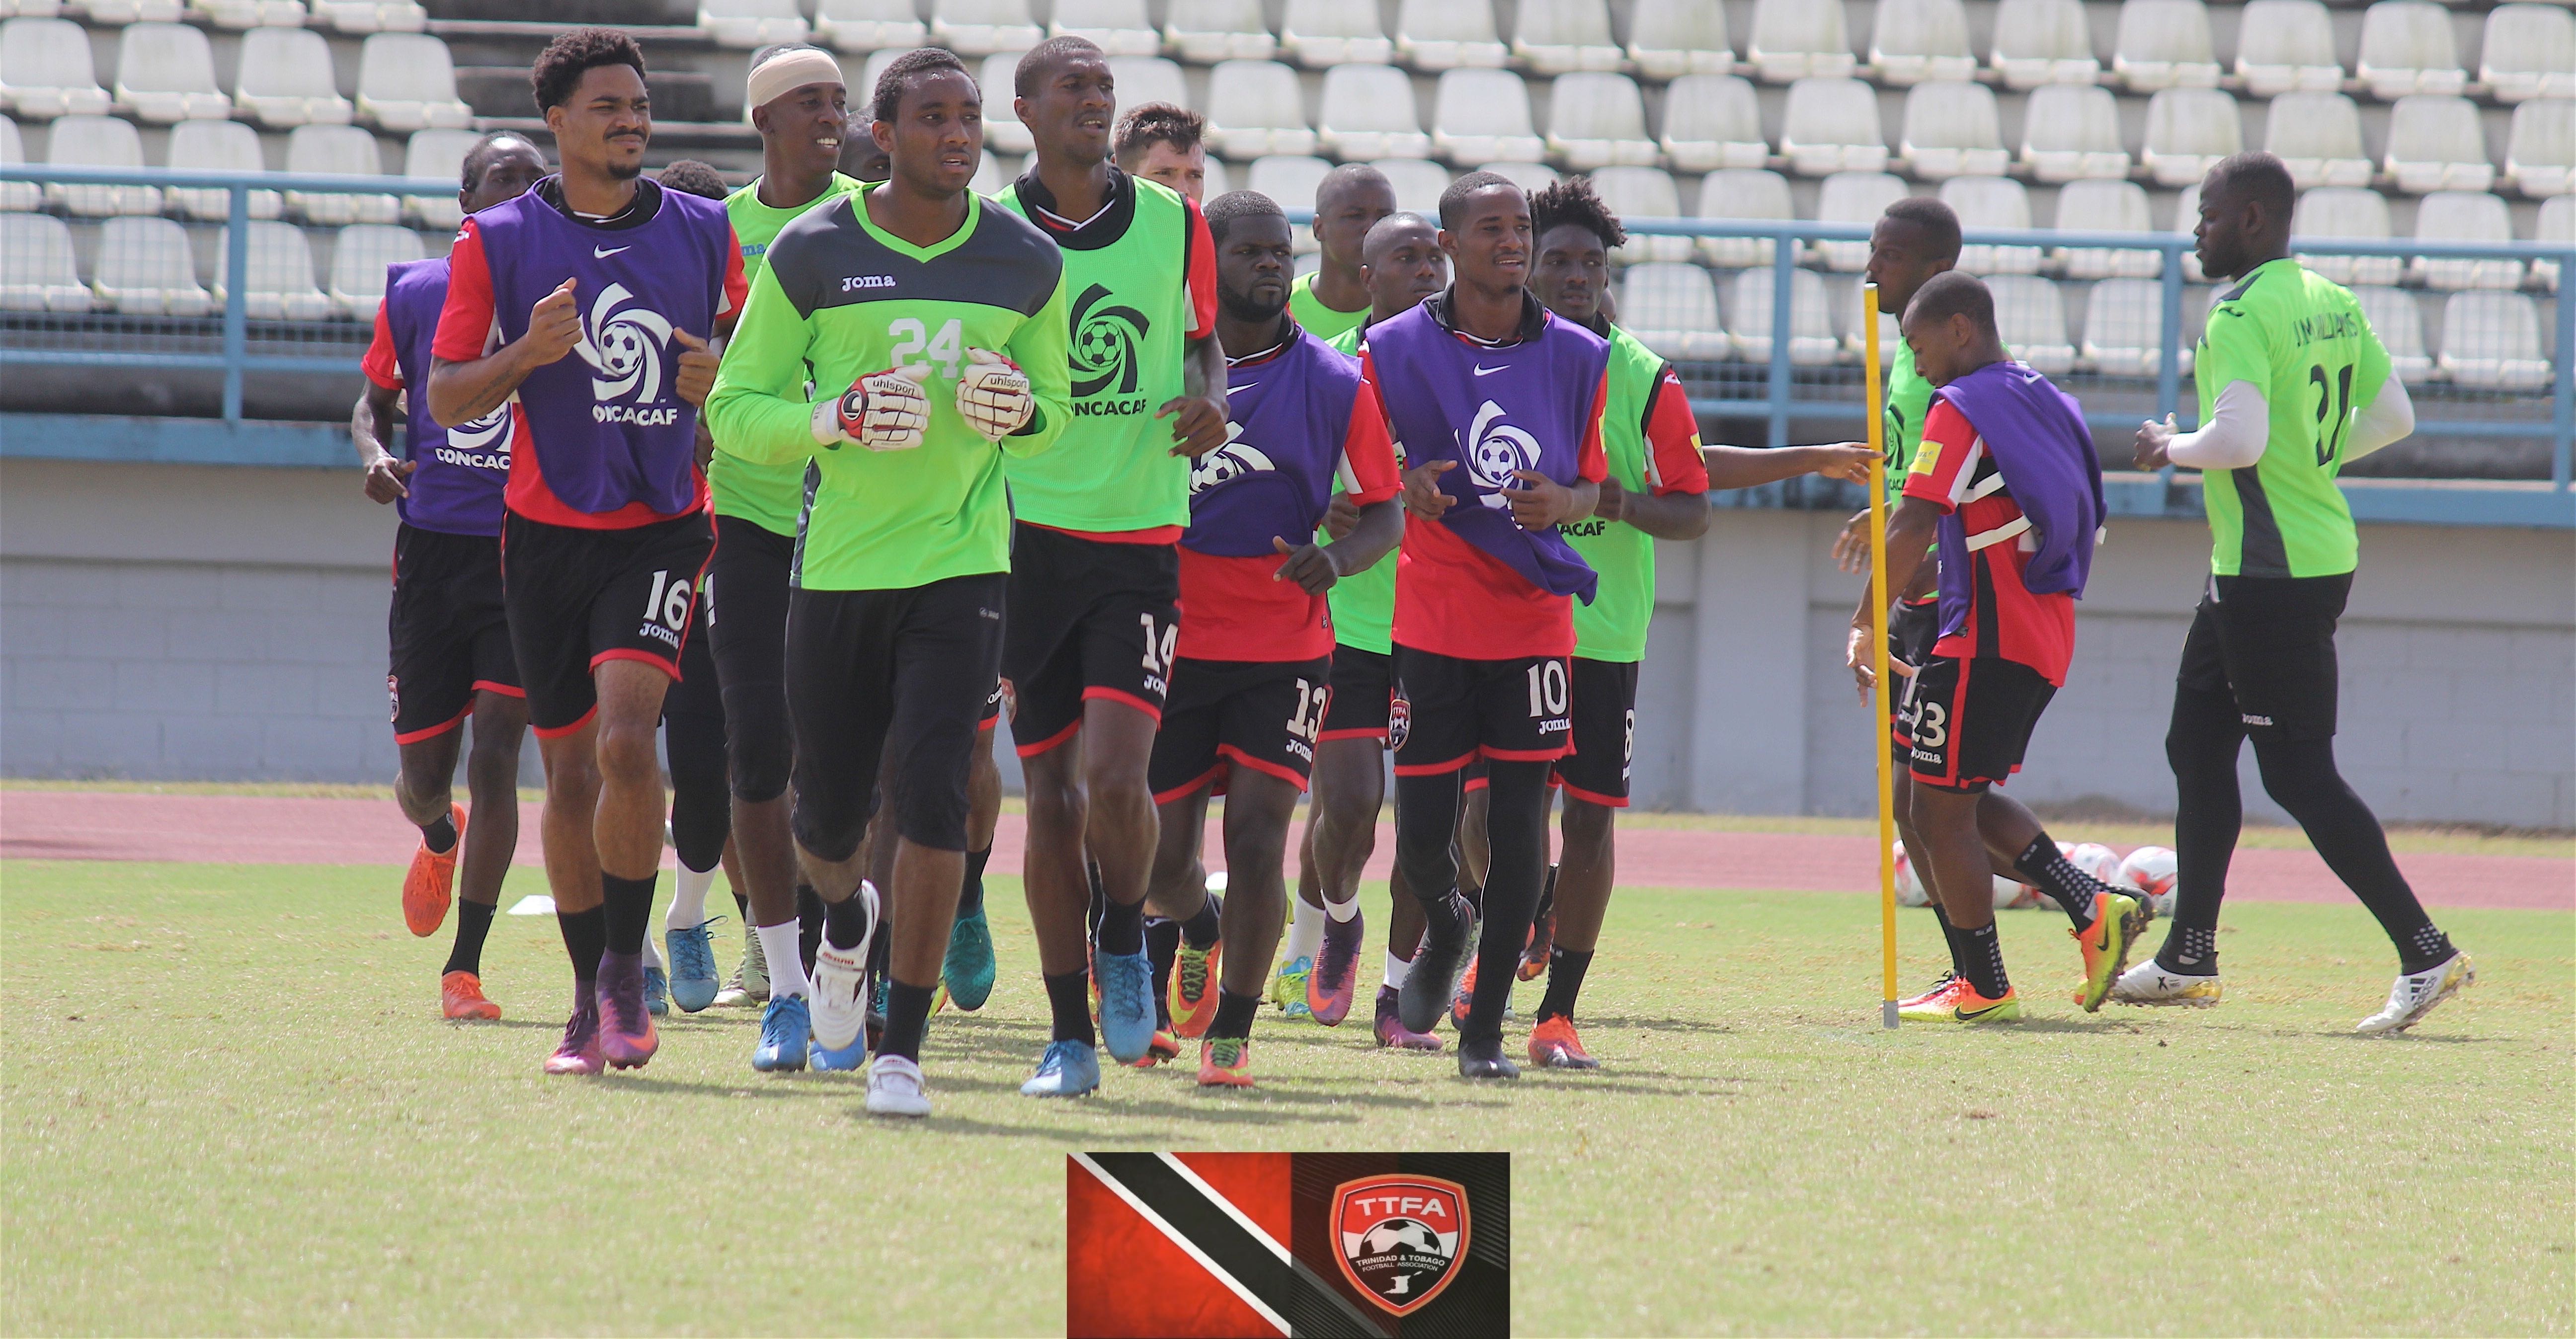 Players respond positively to Lawrence in opening training camp.